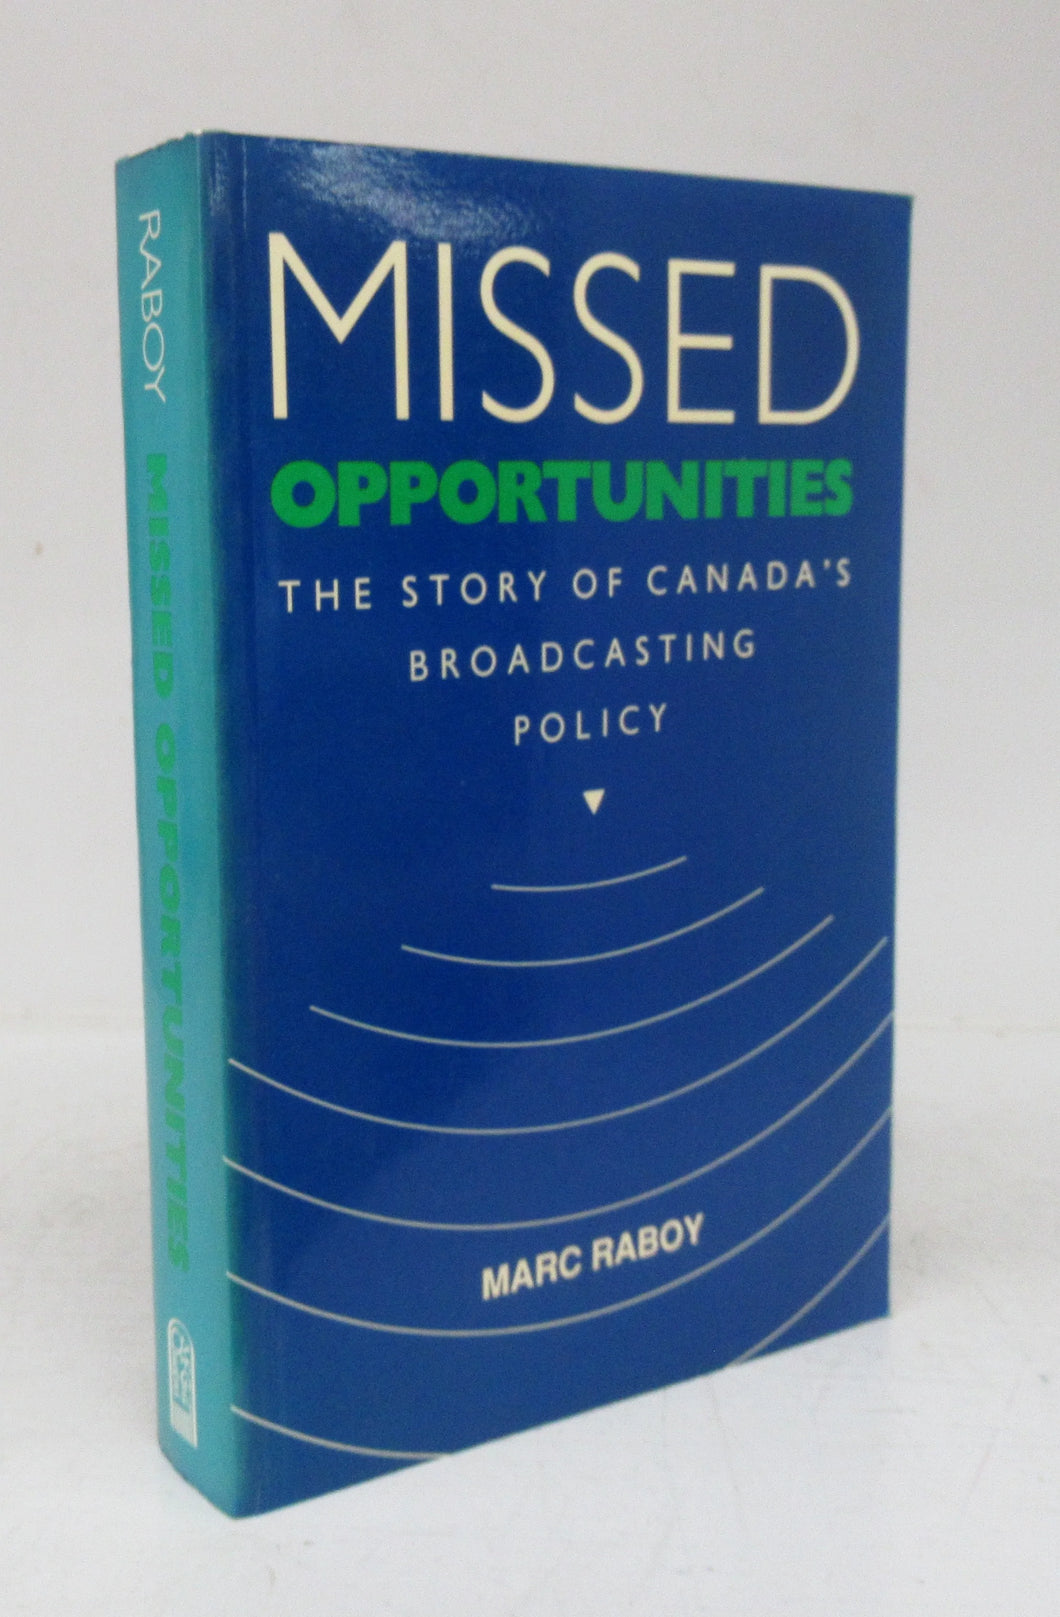 Missed Opportunities: The Story of Canada's Broadcasting Policy